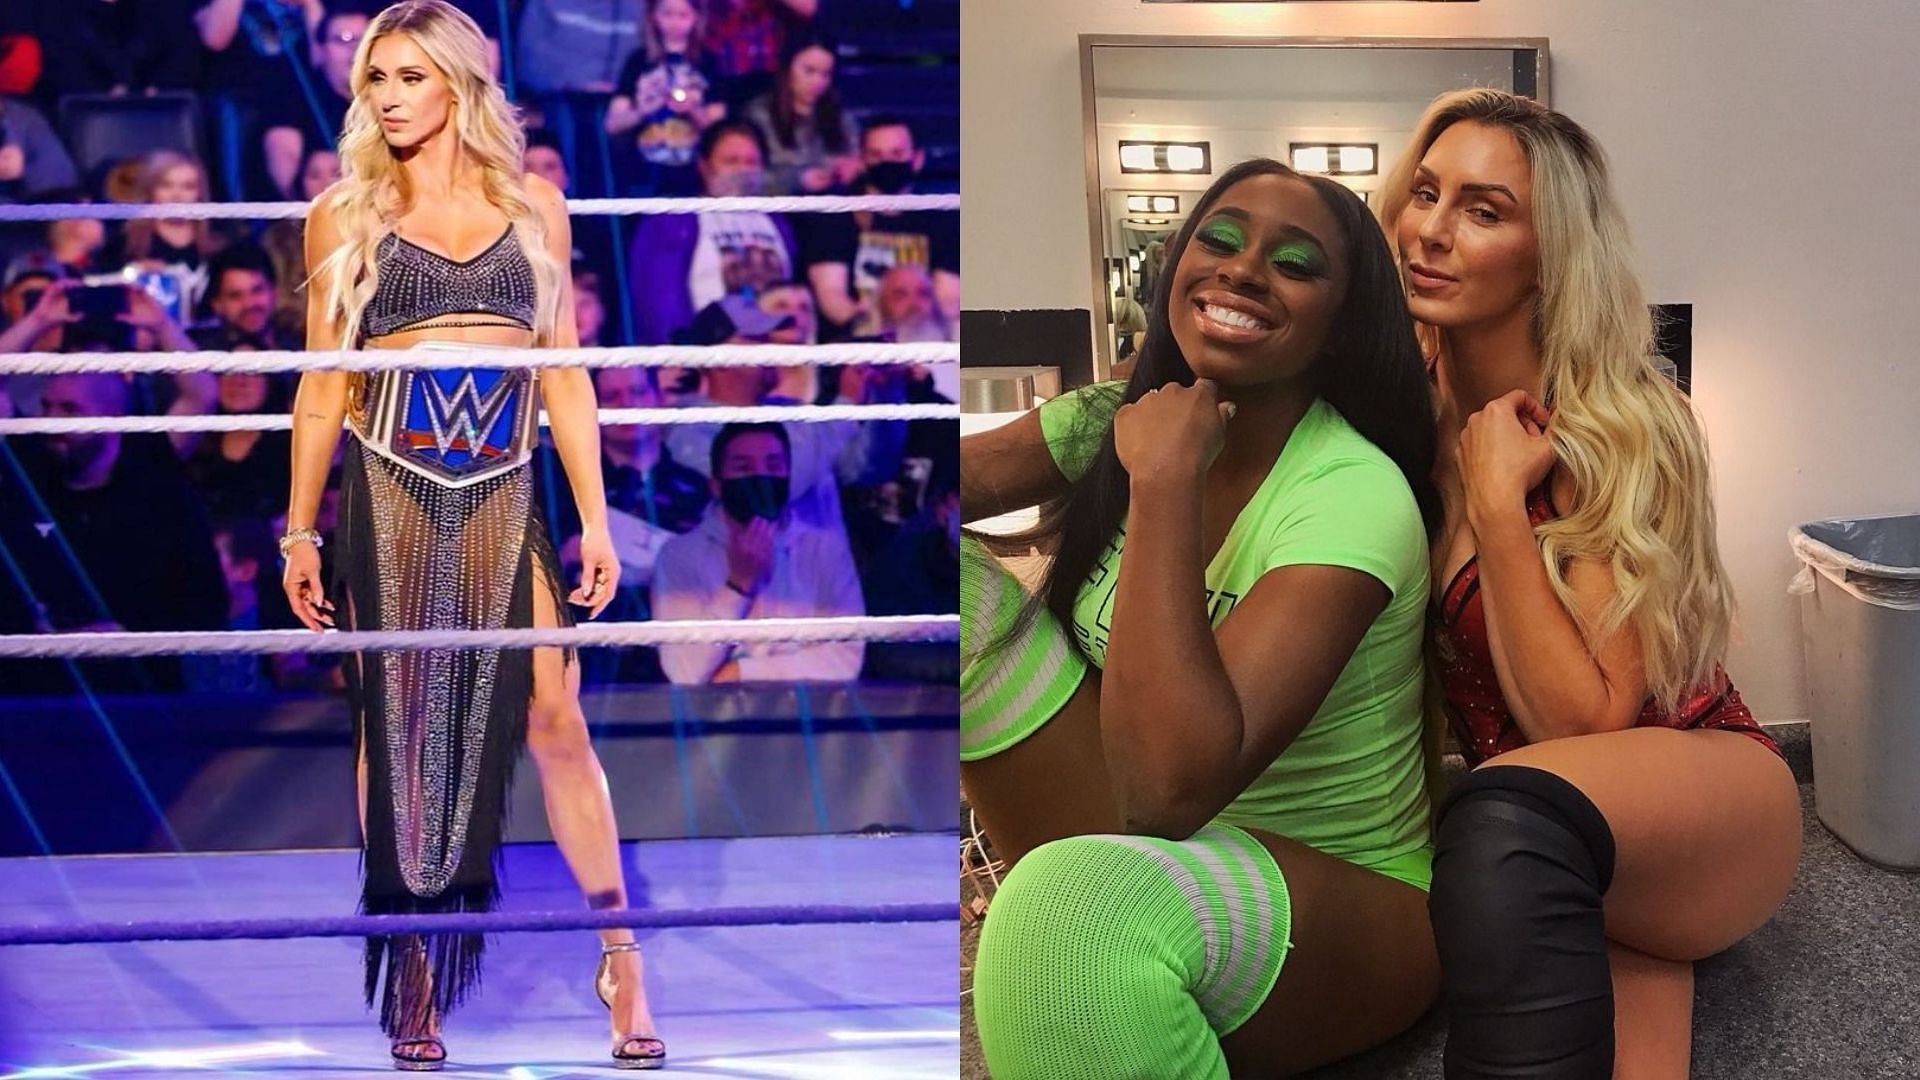 Charlotte Flair and Naomi are both former SmackDown Women